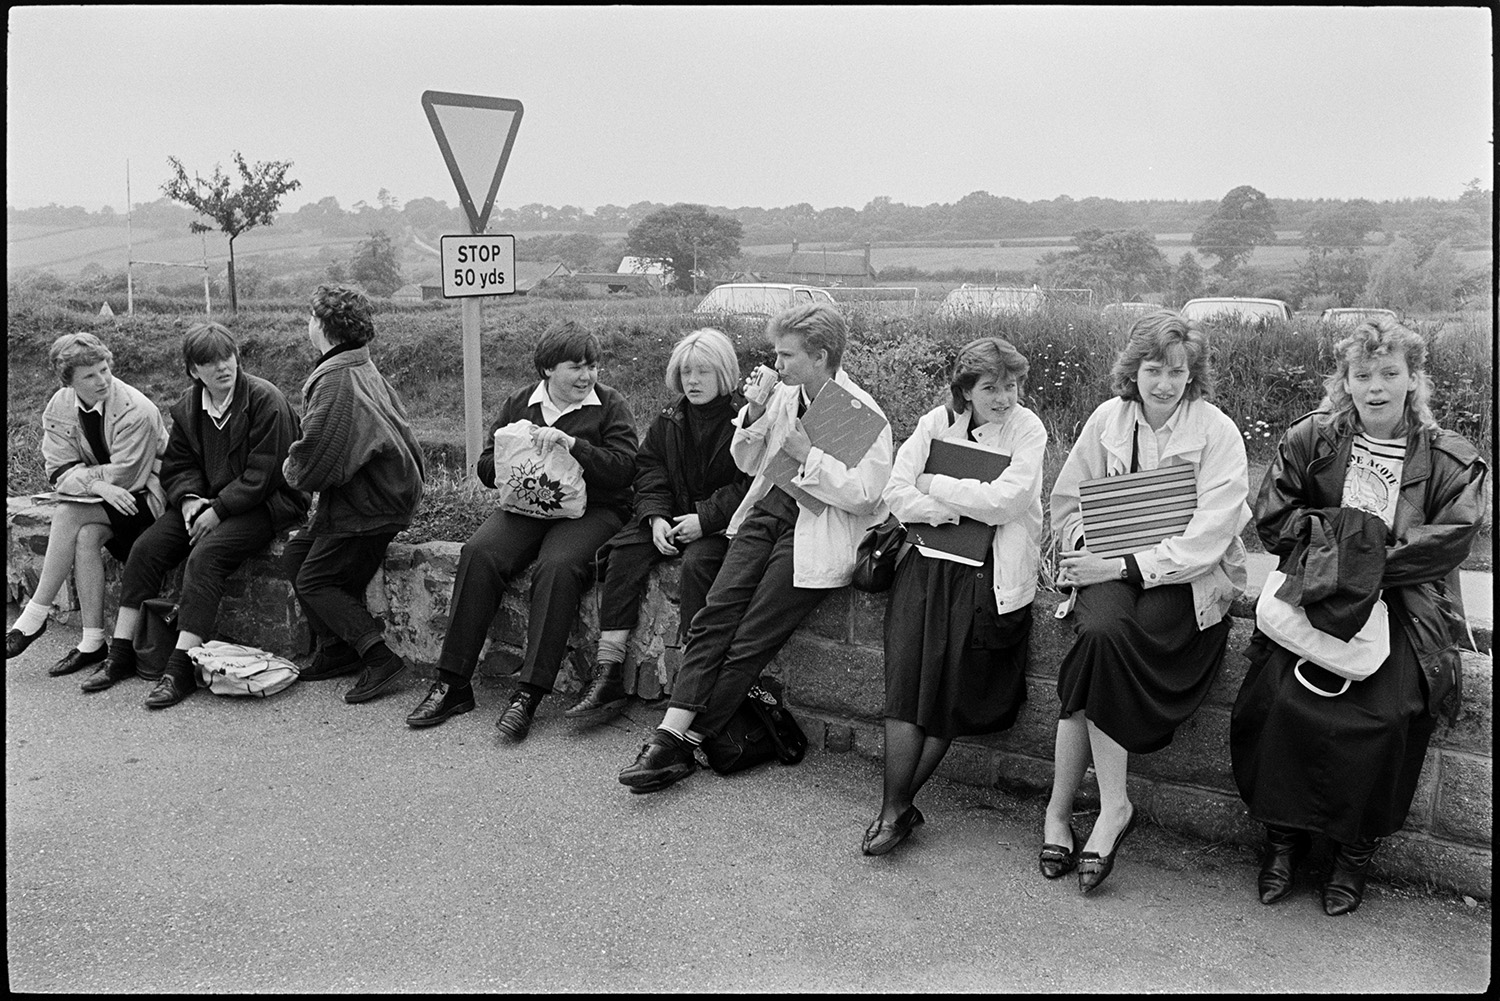 Schoolchildren waiting for bus after school and getting on to go home.
[Schoolchildren waiting for their bus after school at Chulmleigh Community College. They are sitting on a wall alongside a traffic warning sign, with a wooded landscape and parked cars in the background.]